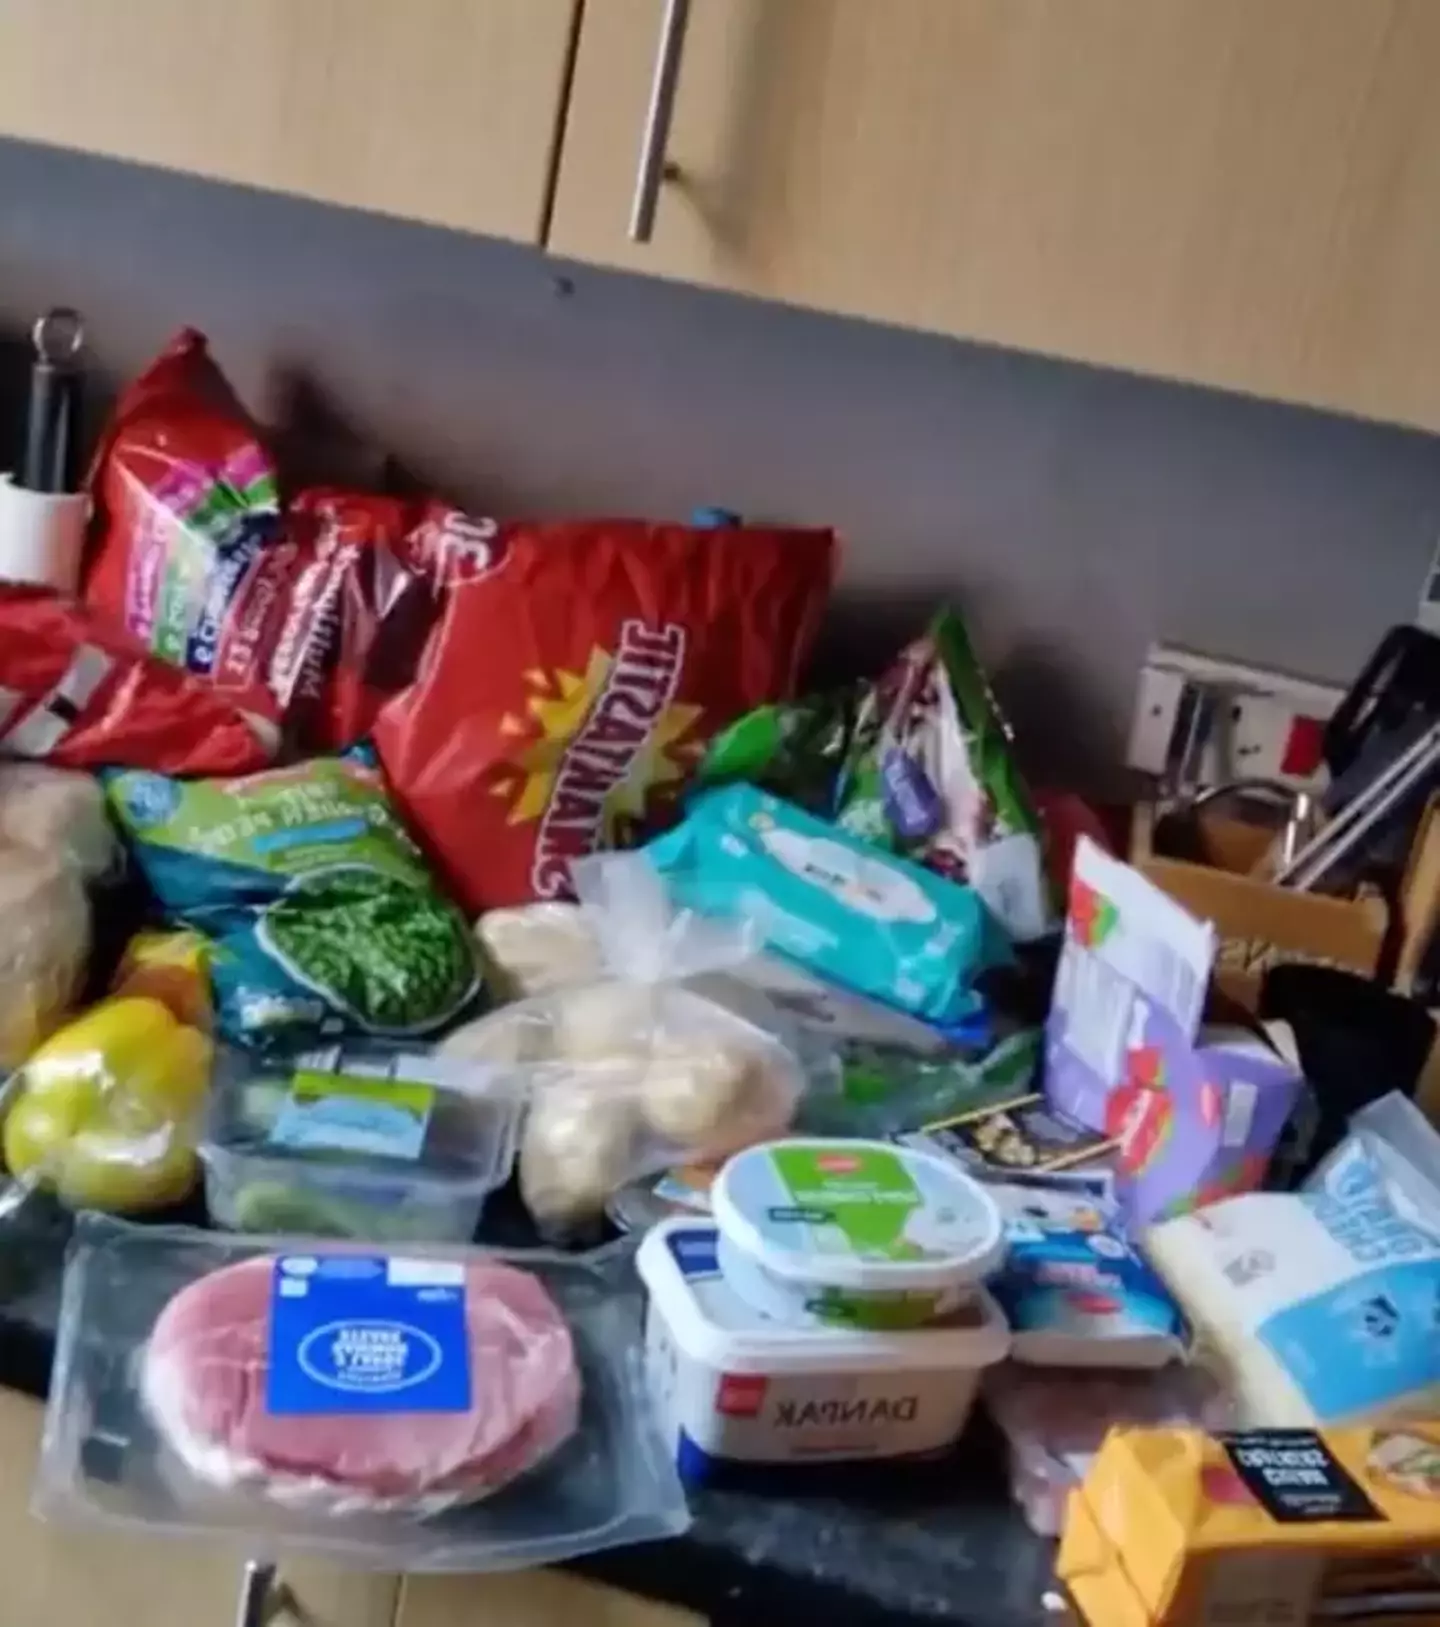 The food shop came to £41.65 and she was thinking what she'd have to put back when a stranger stepped in.